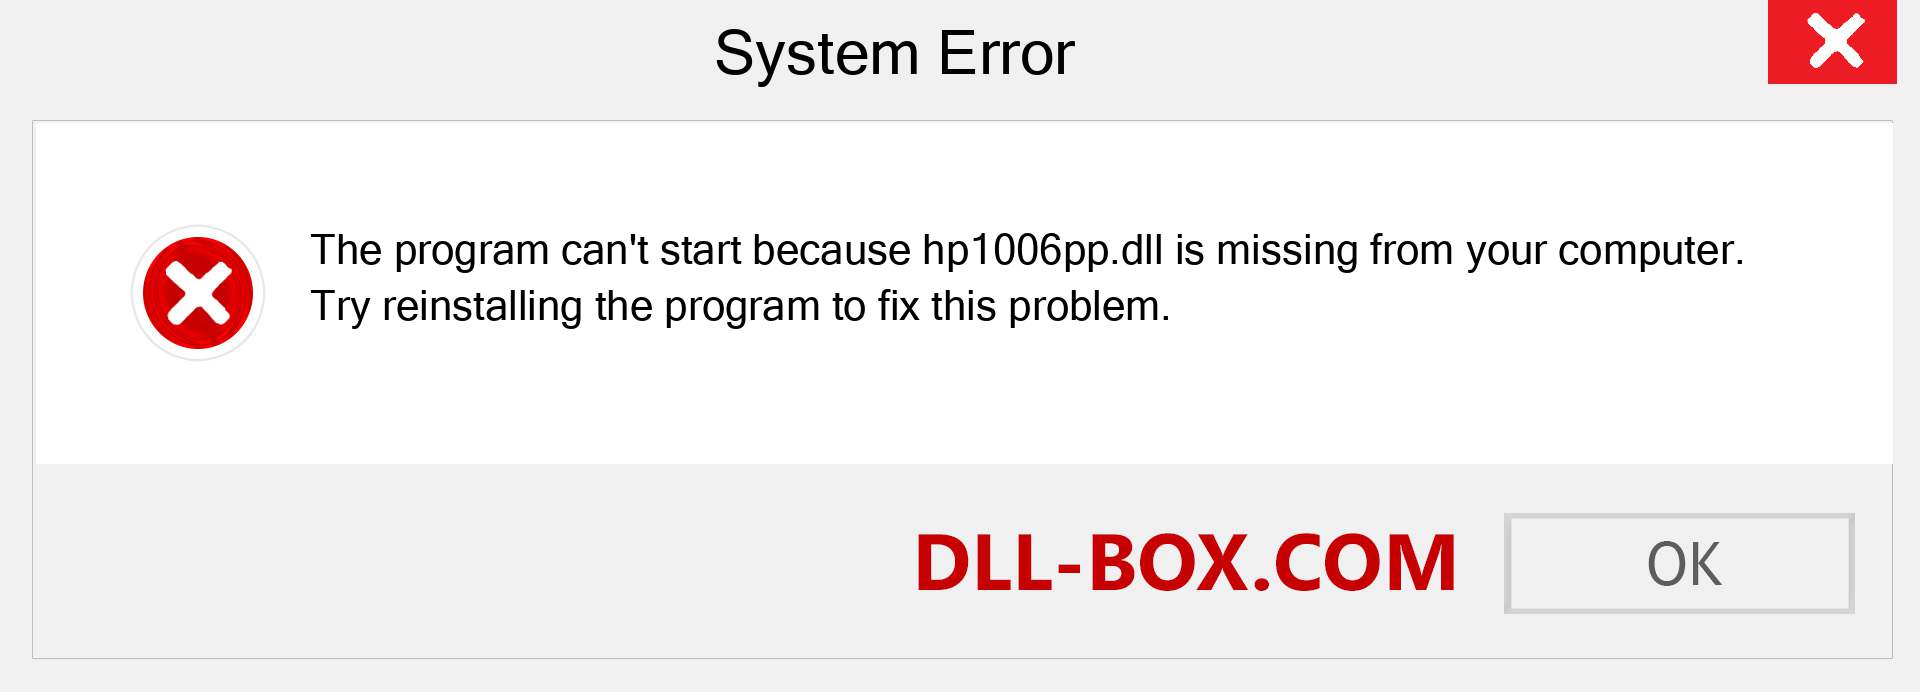  hp1006pp.dll file is missing?. Download for Windows 7, 8, 10 - Fix  hp1006pp dll Missing Error on Windows, photos, images